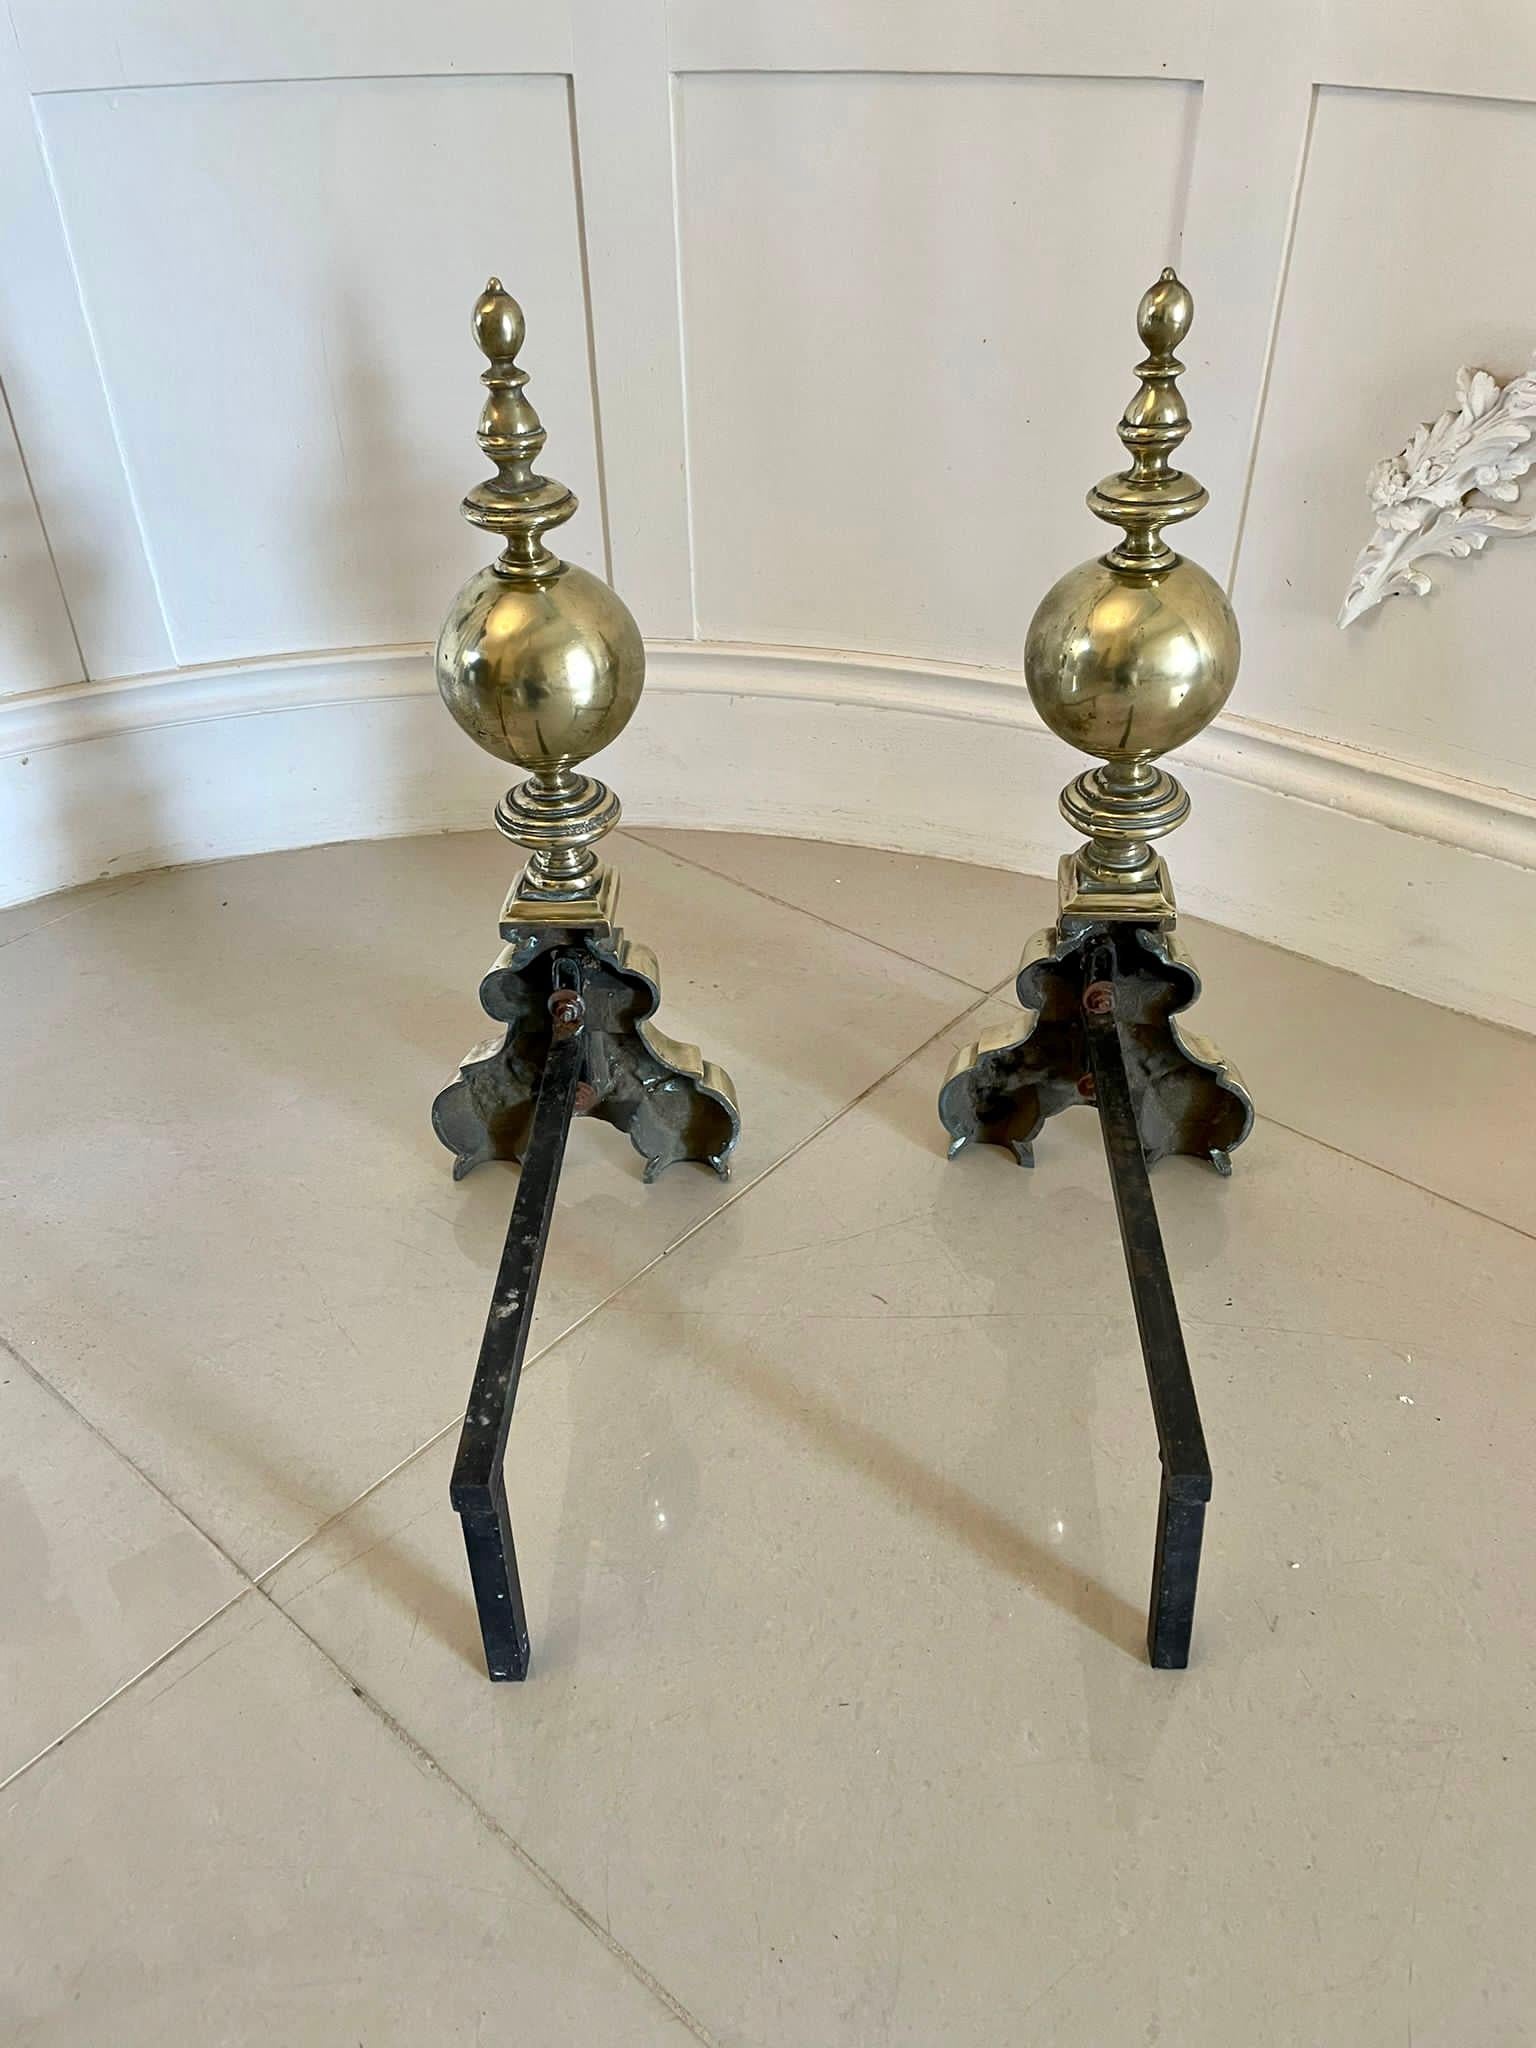 English Superb Quality Ornate Antique Victorian Pair of Brass Fire Dogs For Sale